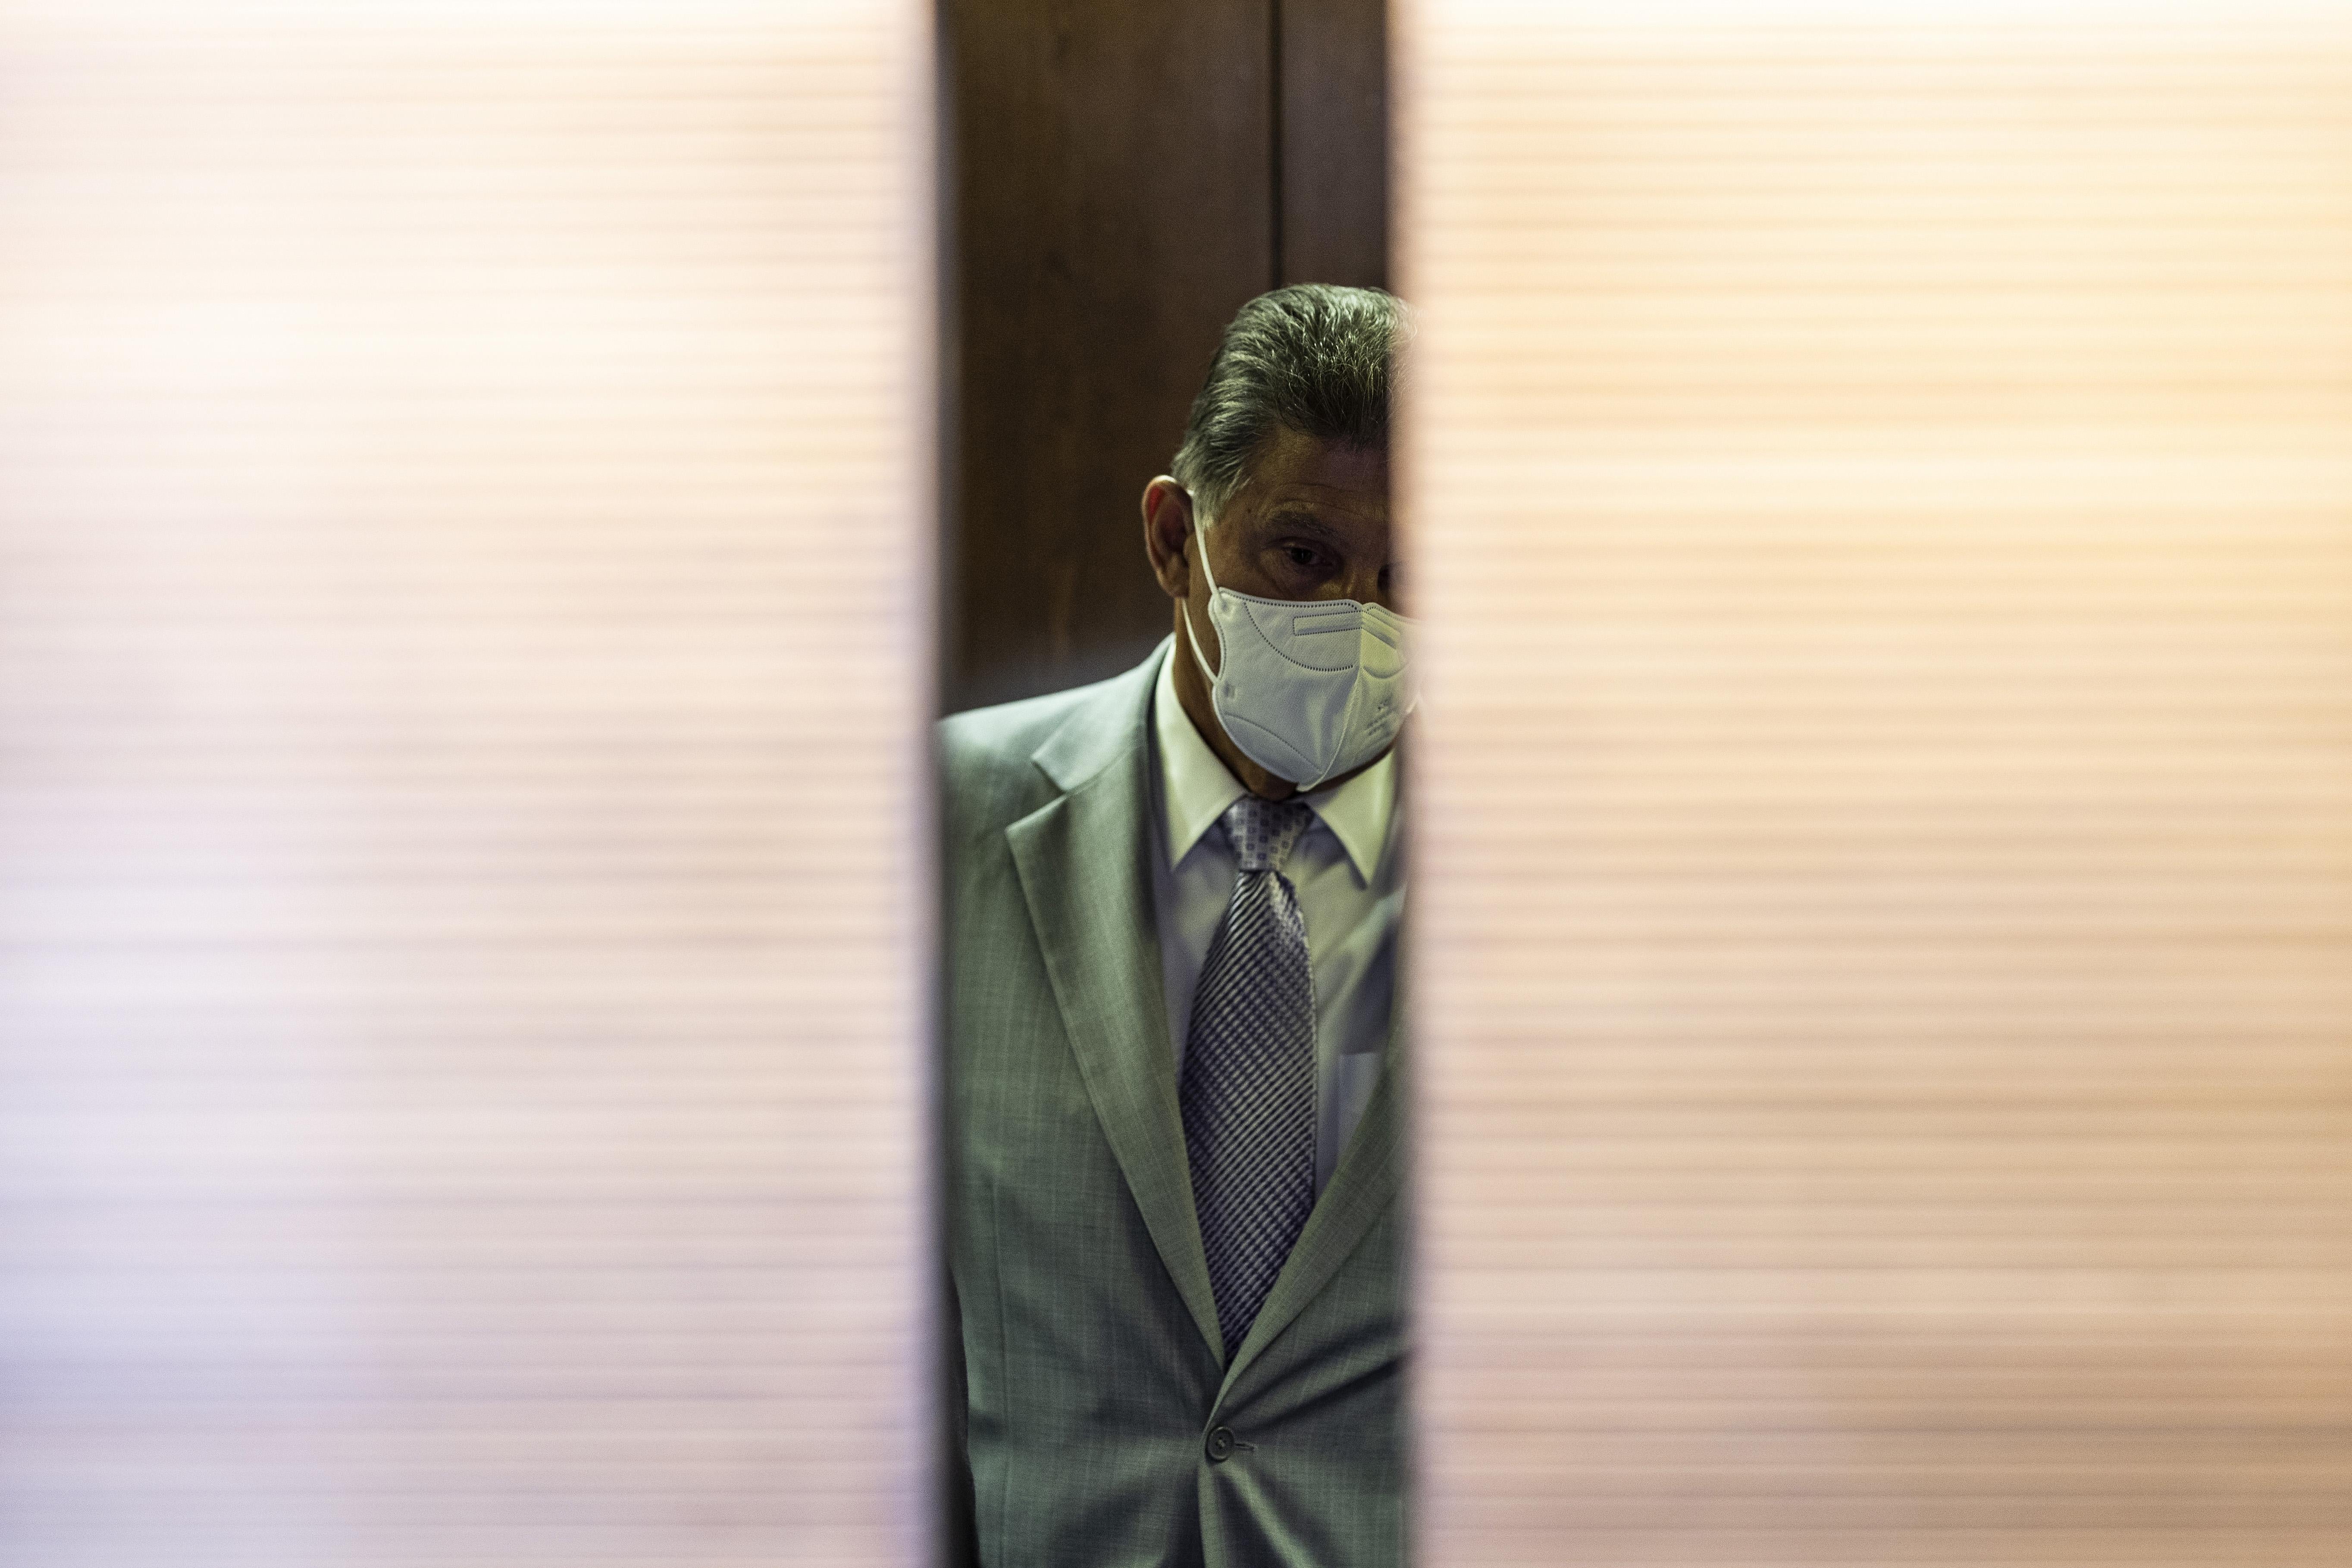 WASHINGTON, DC - AUGUST 02: Sen. Joe Manchin (D-WV) rides in an elevator after speaking to reporters outside of his office in the Hart Senate Office Building on August 02, 2022 in Washington, DC. Negotiations in the U.S. Senate continue for the Inflation Reduction Act of 2022. (Photo by Anna Moneymaker/Getty Images)